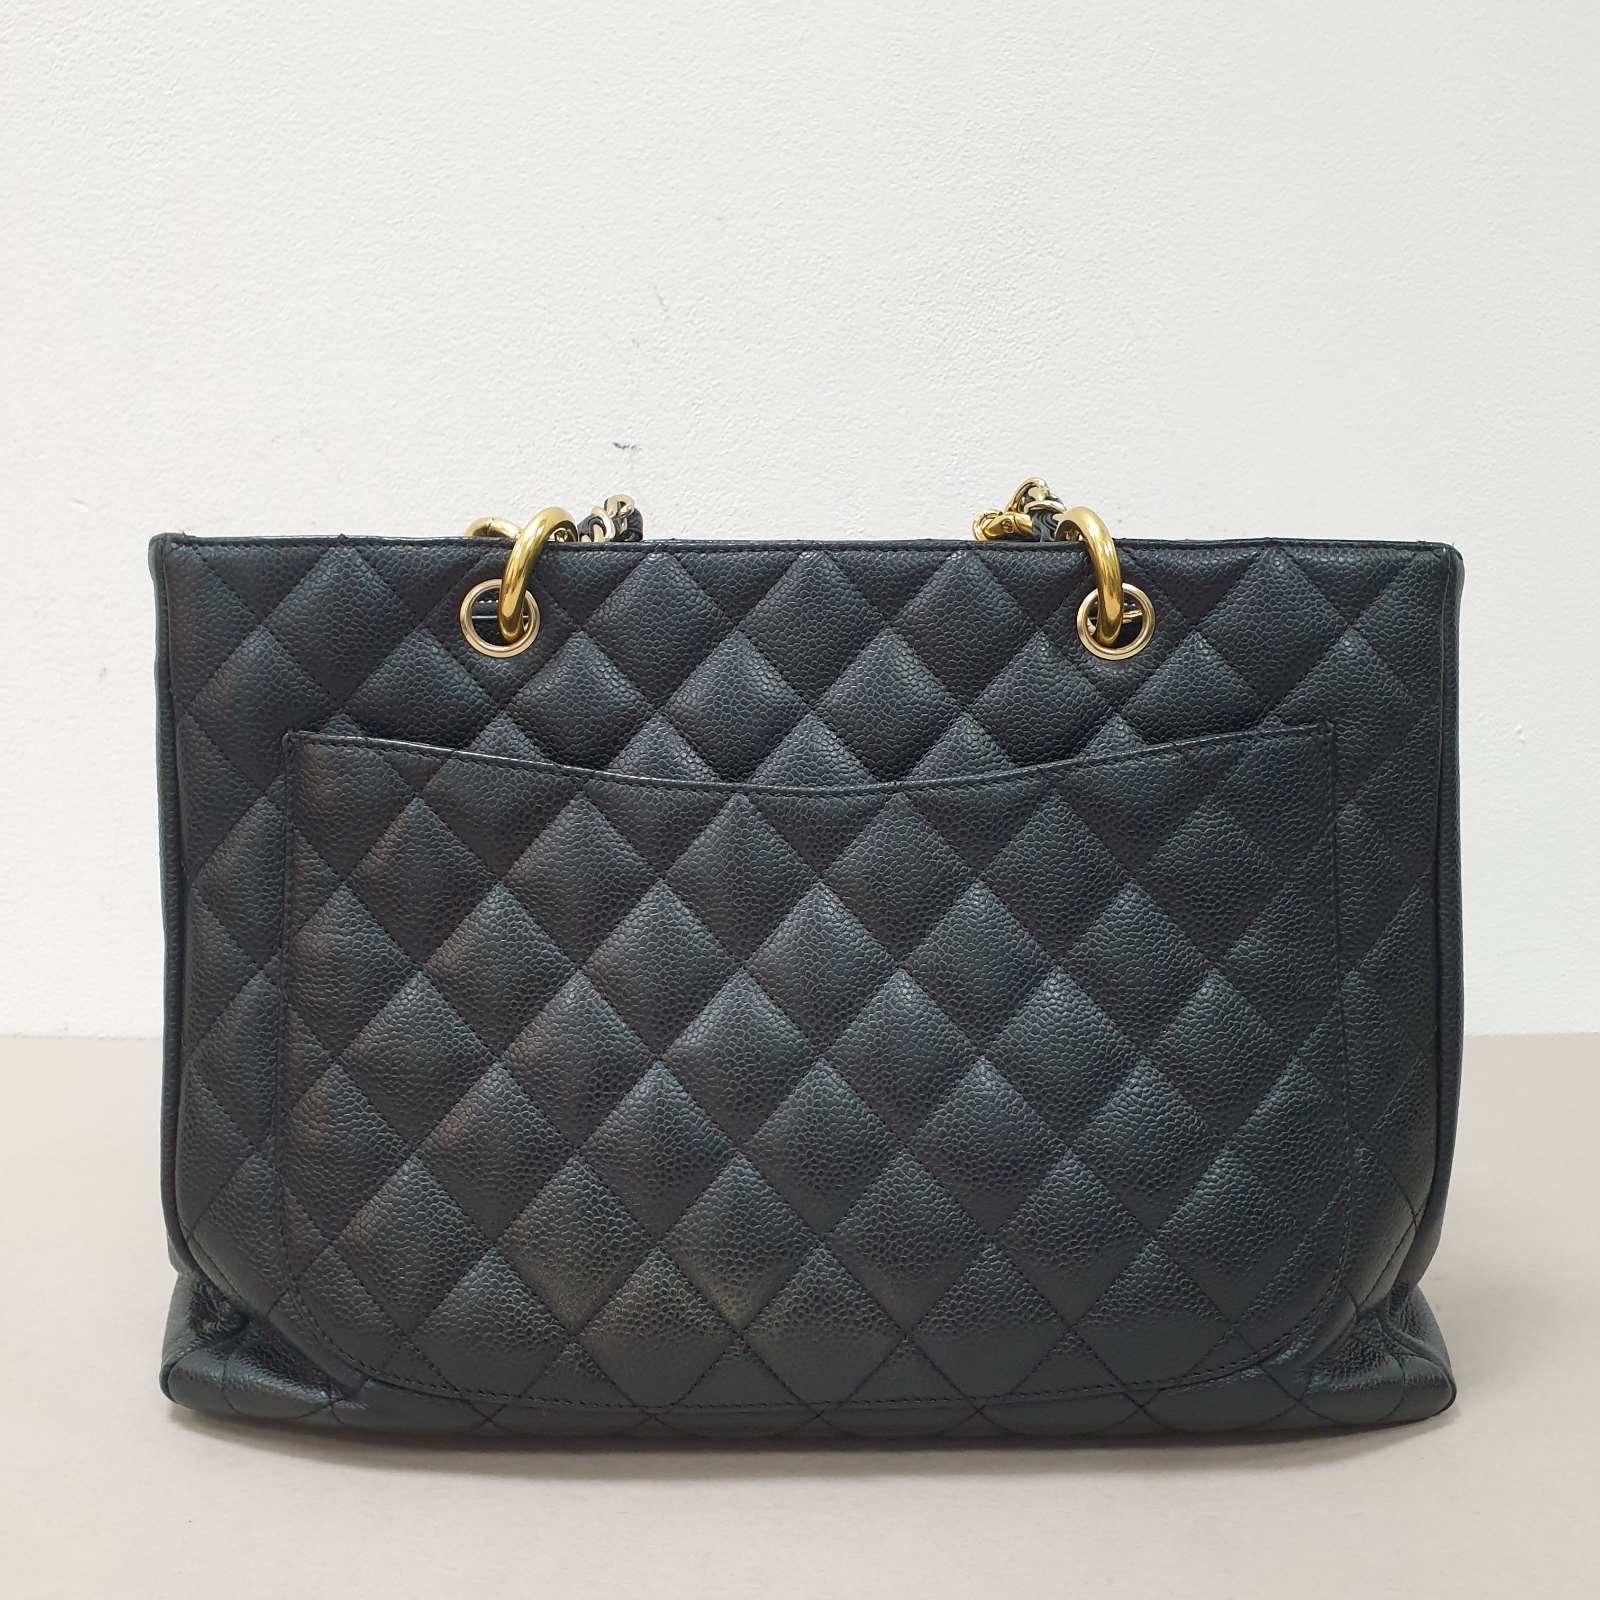 Chanel Shopping GST Black Quilted Grained Leather Shopping Bag 3